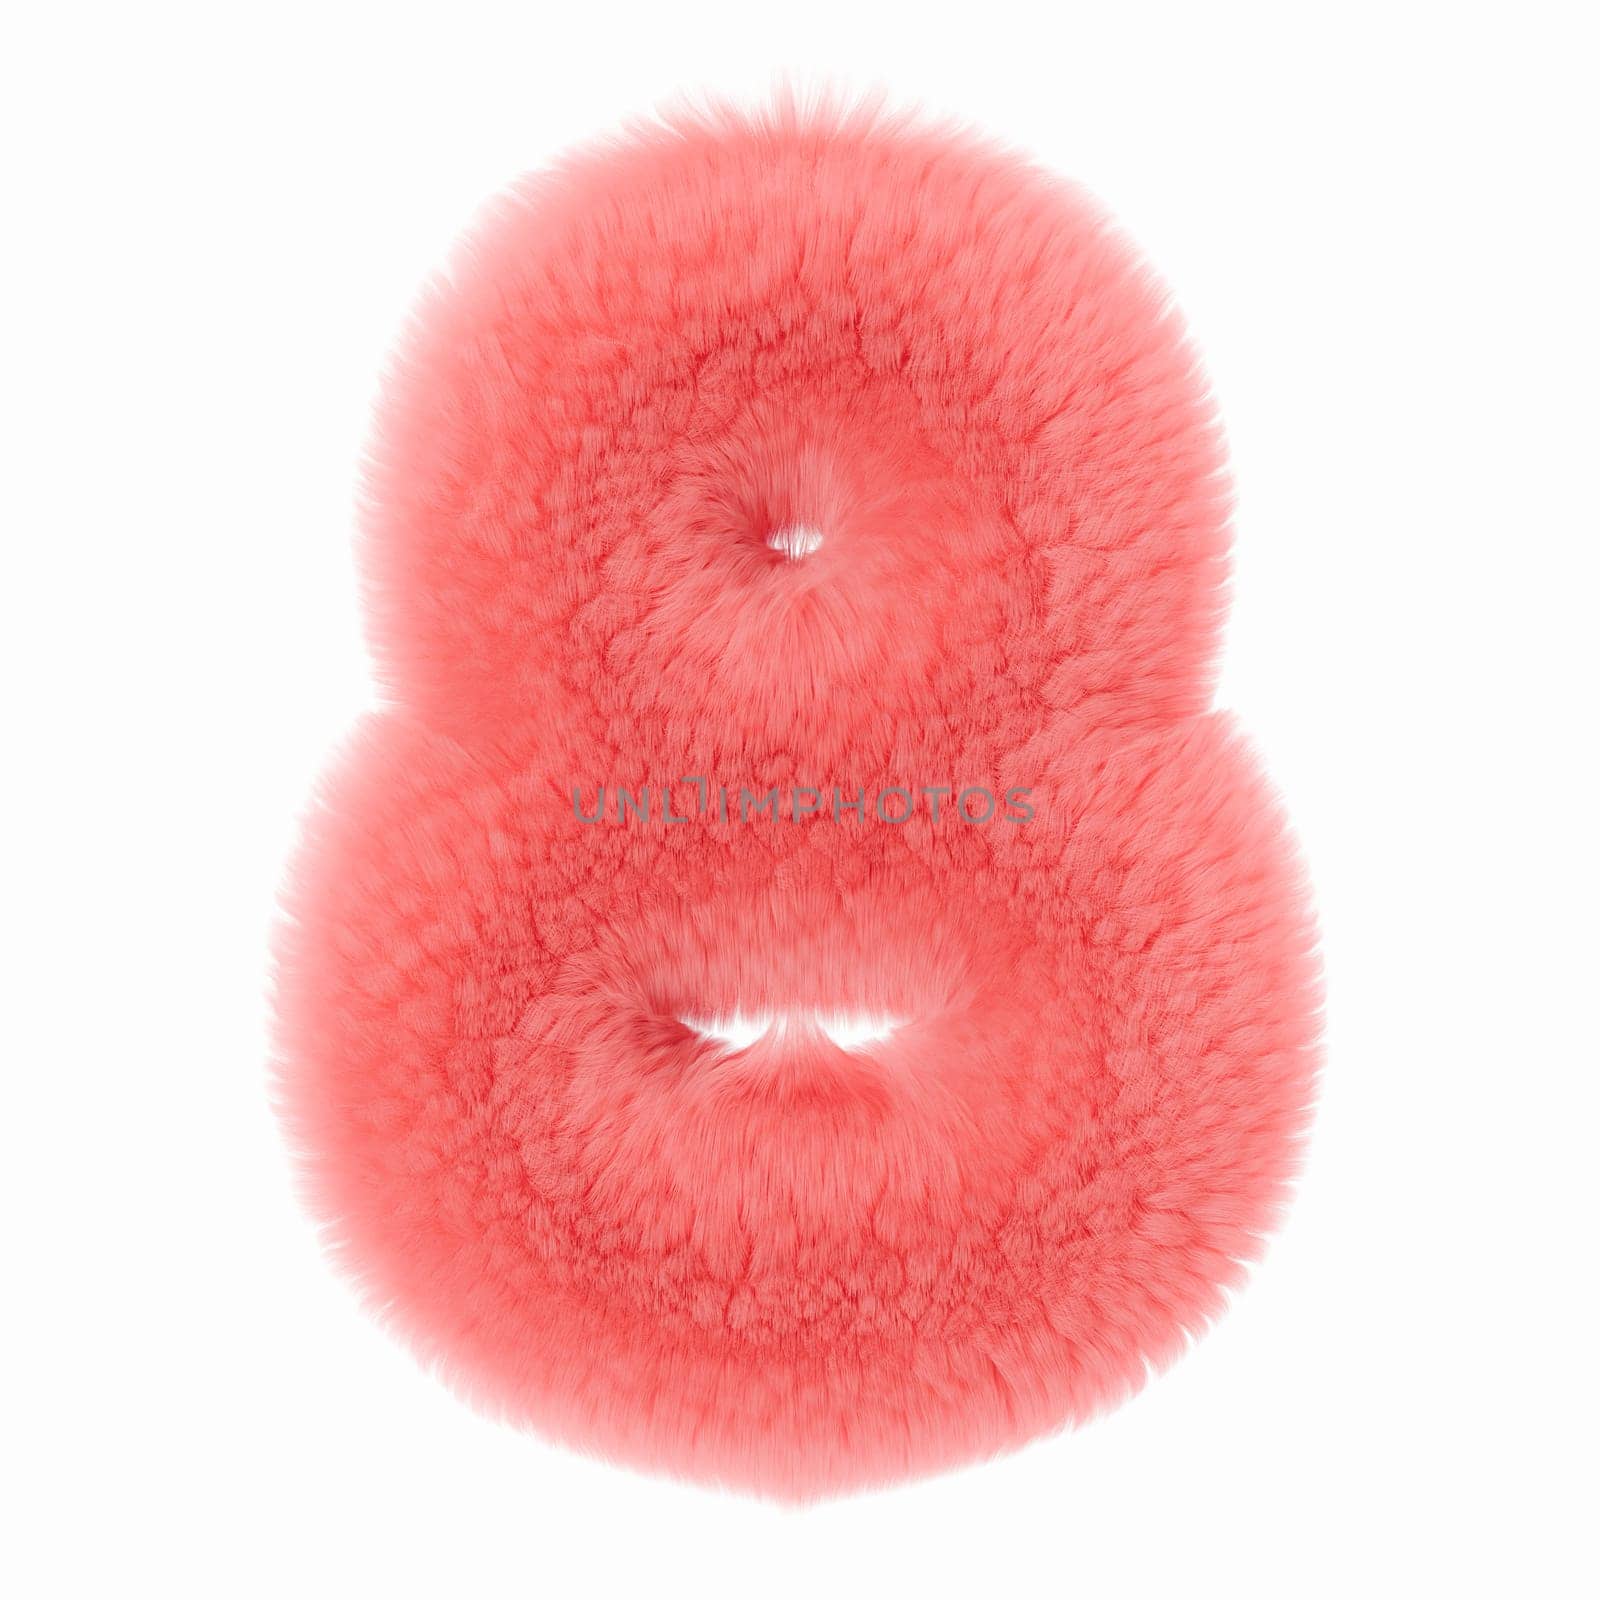 Pink and fluffy 3D number eight, isolated on white background. Furry, soft and hairy symbol 8. Trendy, cute design element. Cut out object. 3D rendering